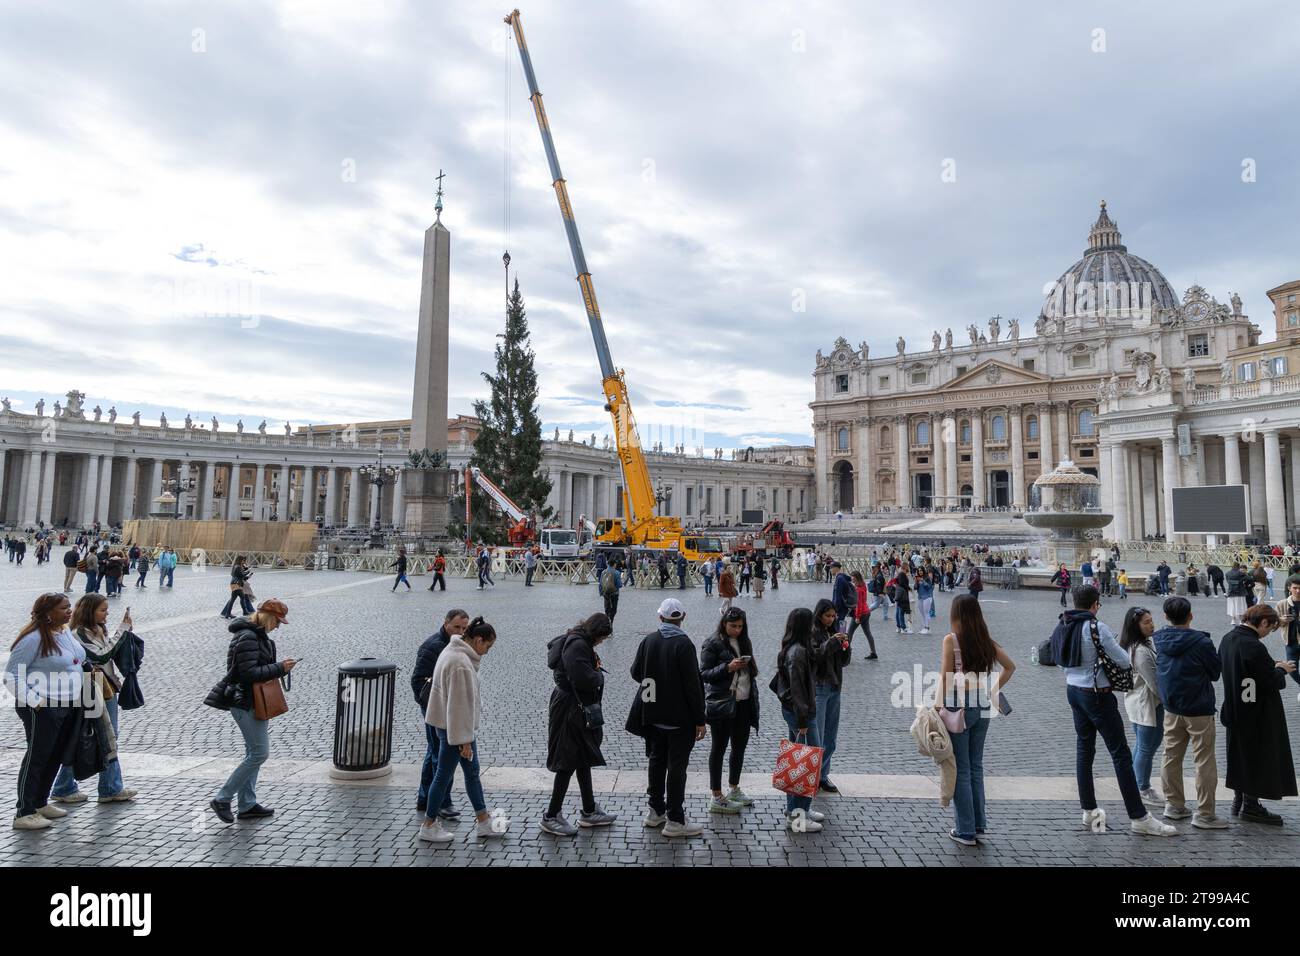 Rome, Italy. 23rd Nov, 2023. Installation of the Christmas Tree in St. Peter's Square with tourists queuing waiting to enter St. Peter's Basilica. The Christmas tree arrived in St. Peter's Square with 27 meters high, it weighs 6.5 tons and was donated by the municipality of Macra, in the woods of Cuneo. It will be decorated with lights and over 7,000 dried edelweiss which will give the effect of a snowfall. The lights will be turned on next December 9. (Photo by Matteo Nardone/Pacific Press/Sipa USA) Credit: Sipa USA/Alamy Live News Stock Photo